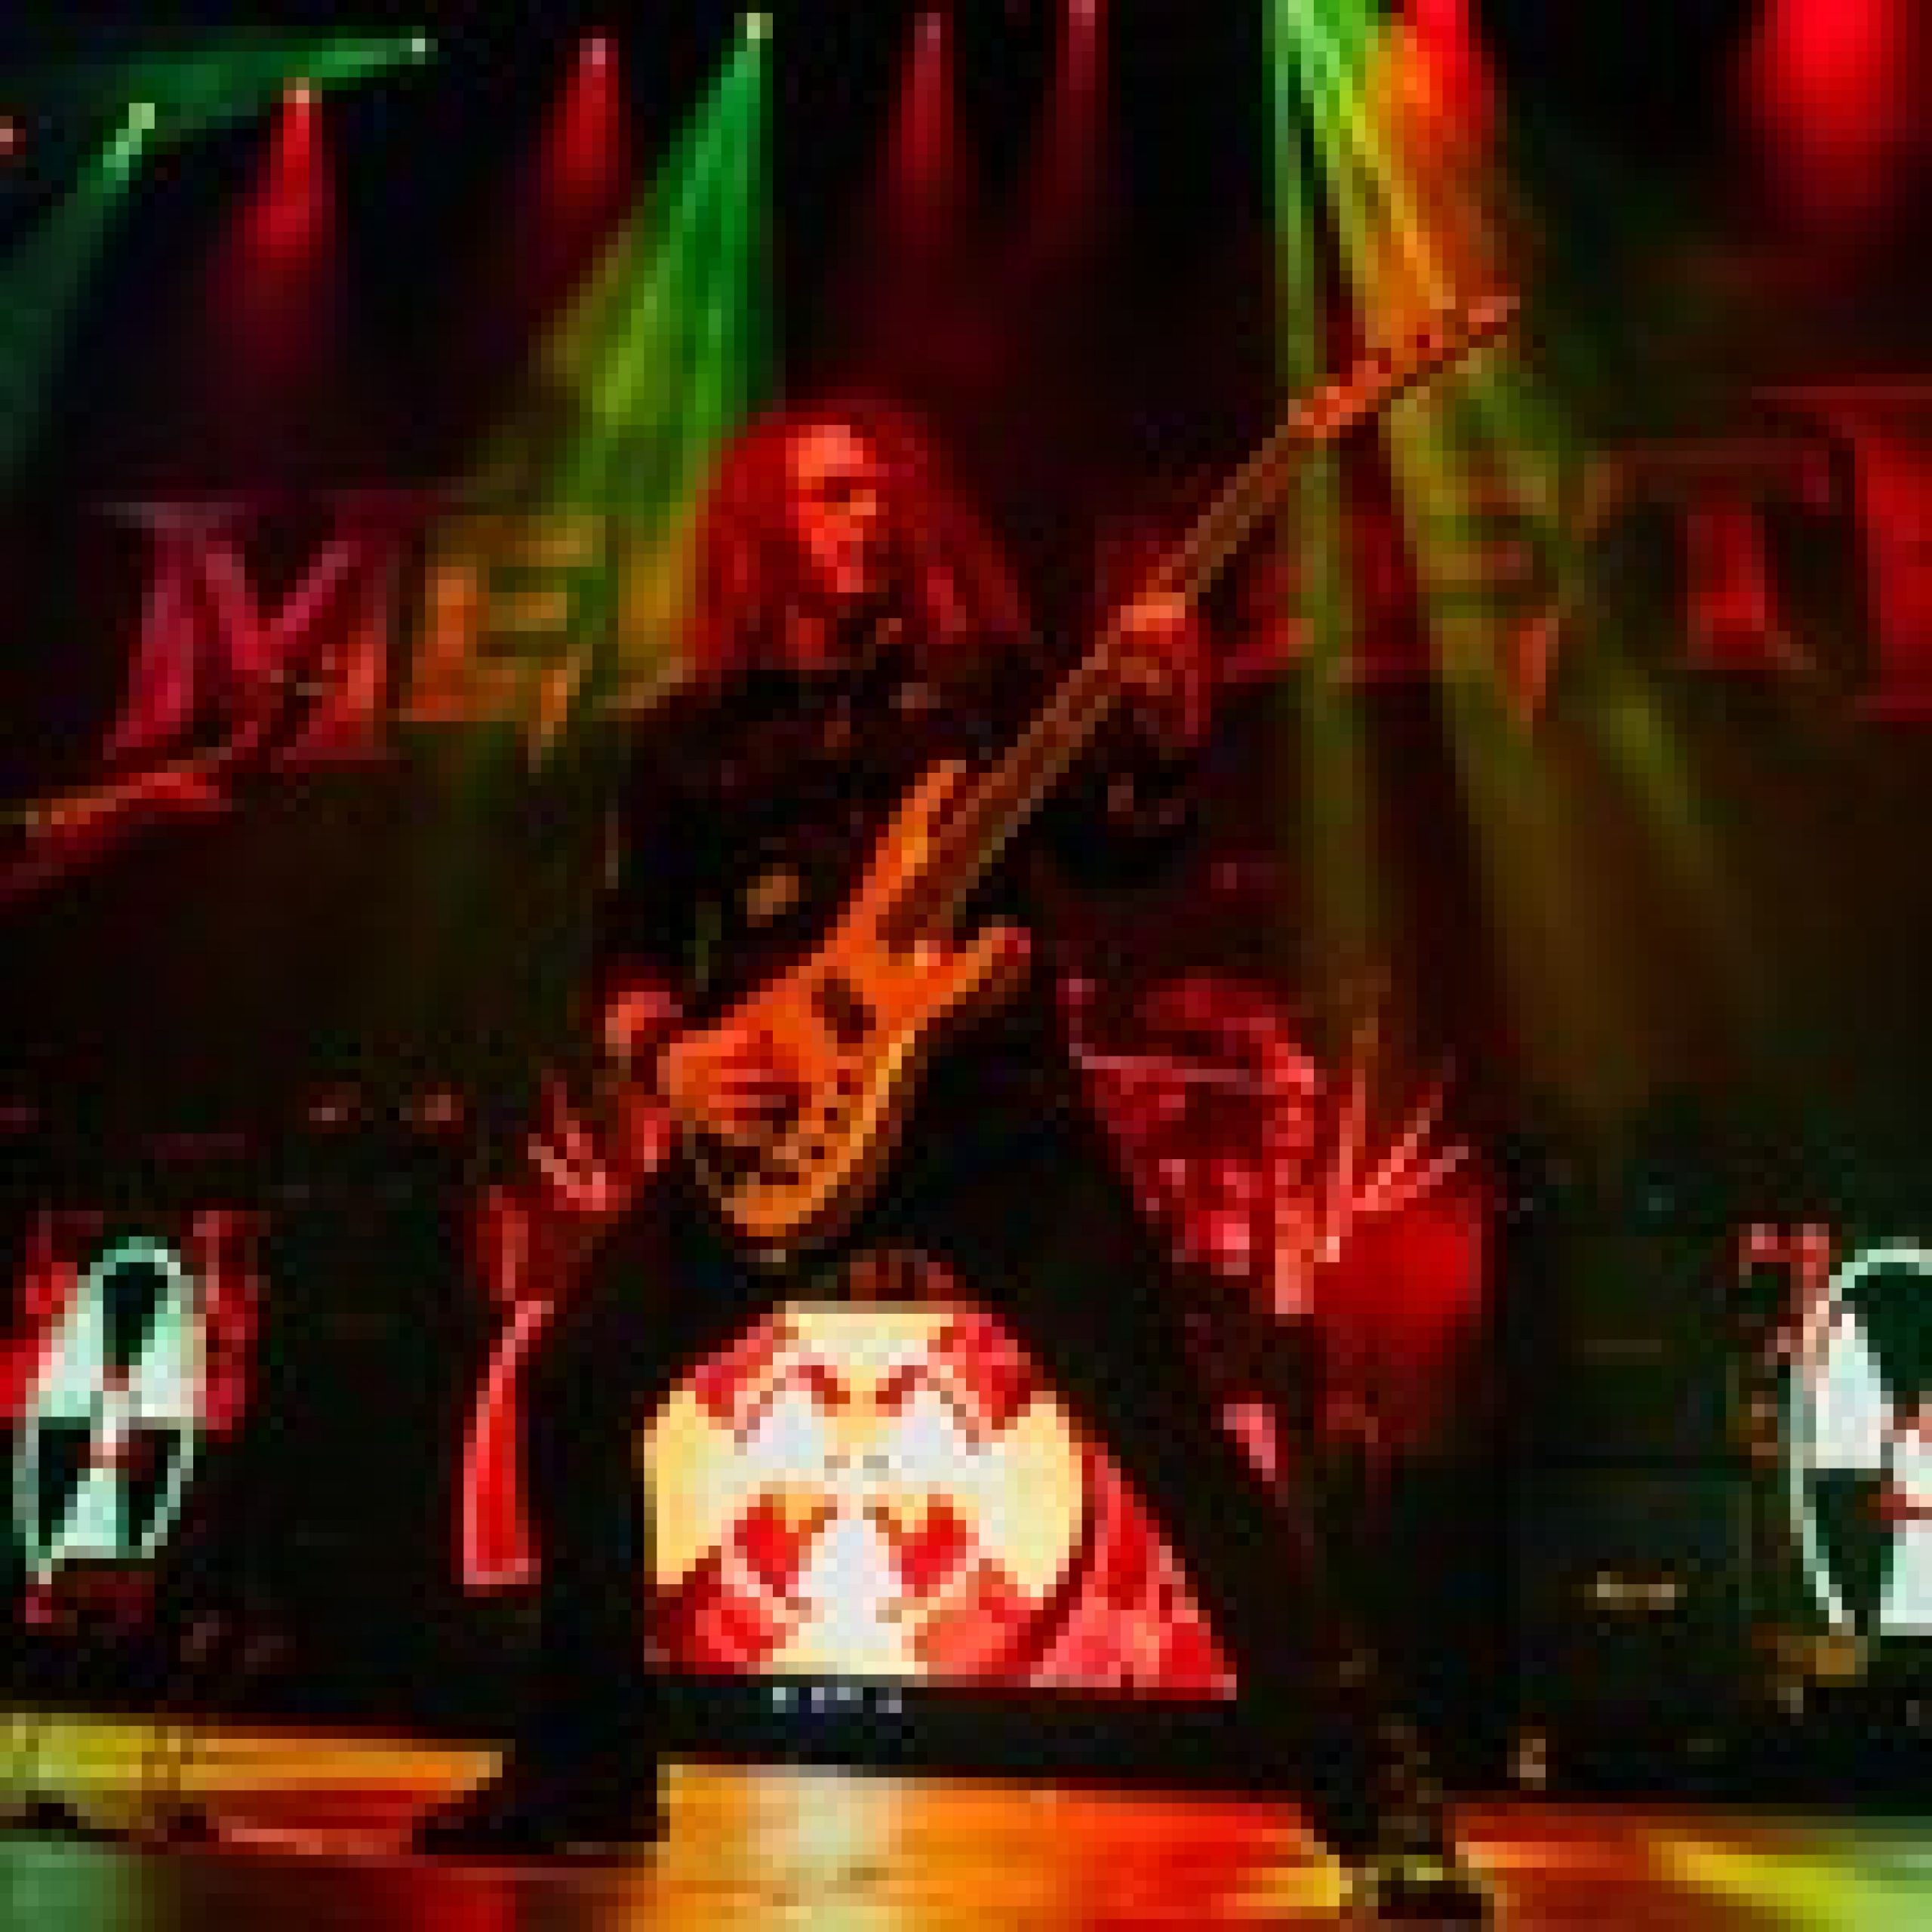 Dave Mustaine Confirms David Ellefson Will Not Return to Megadeth